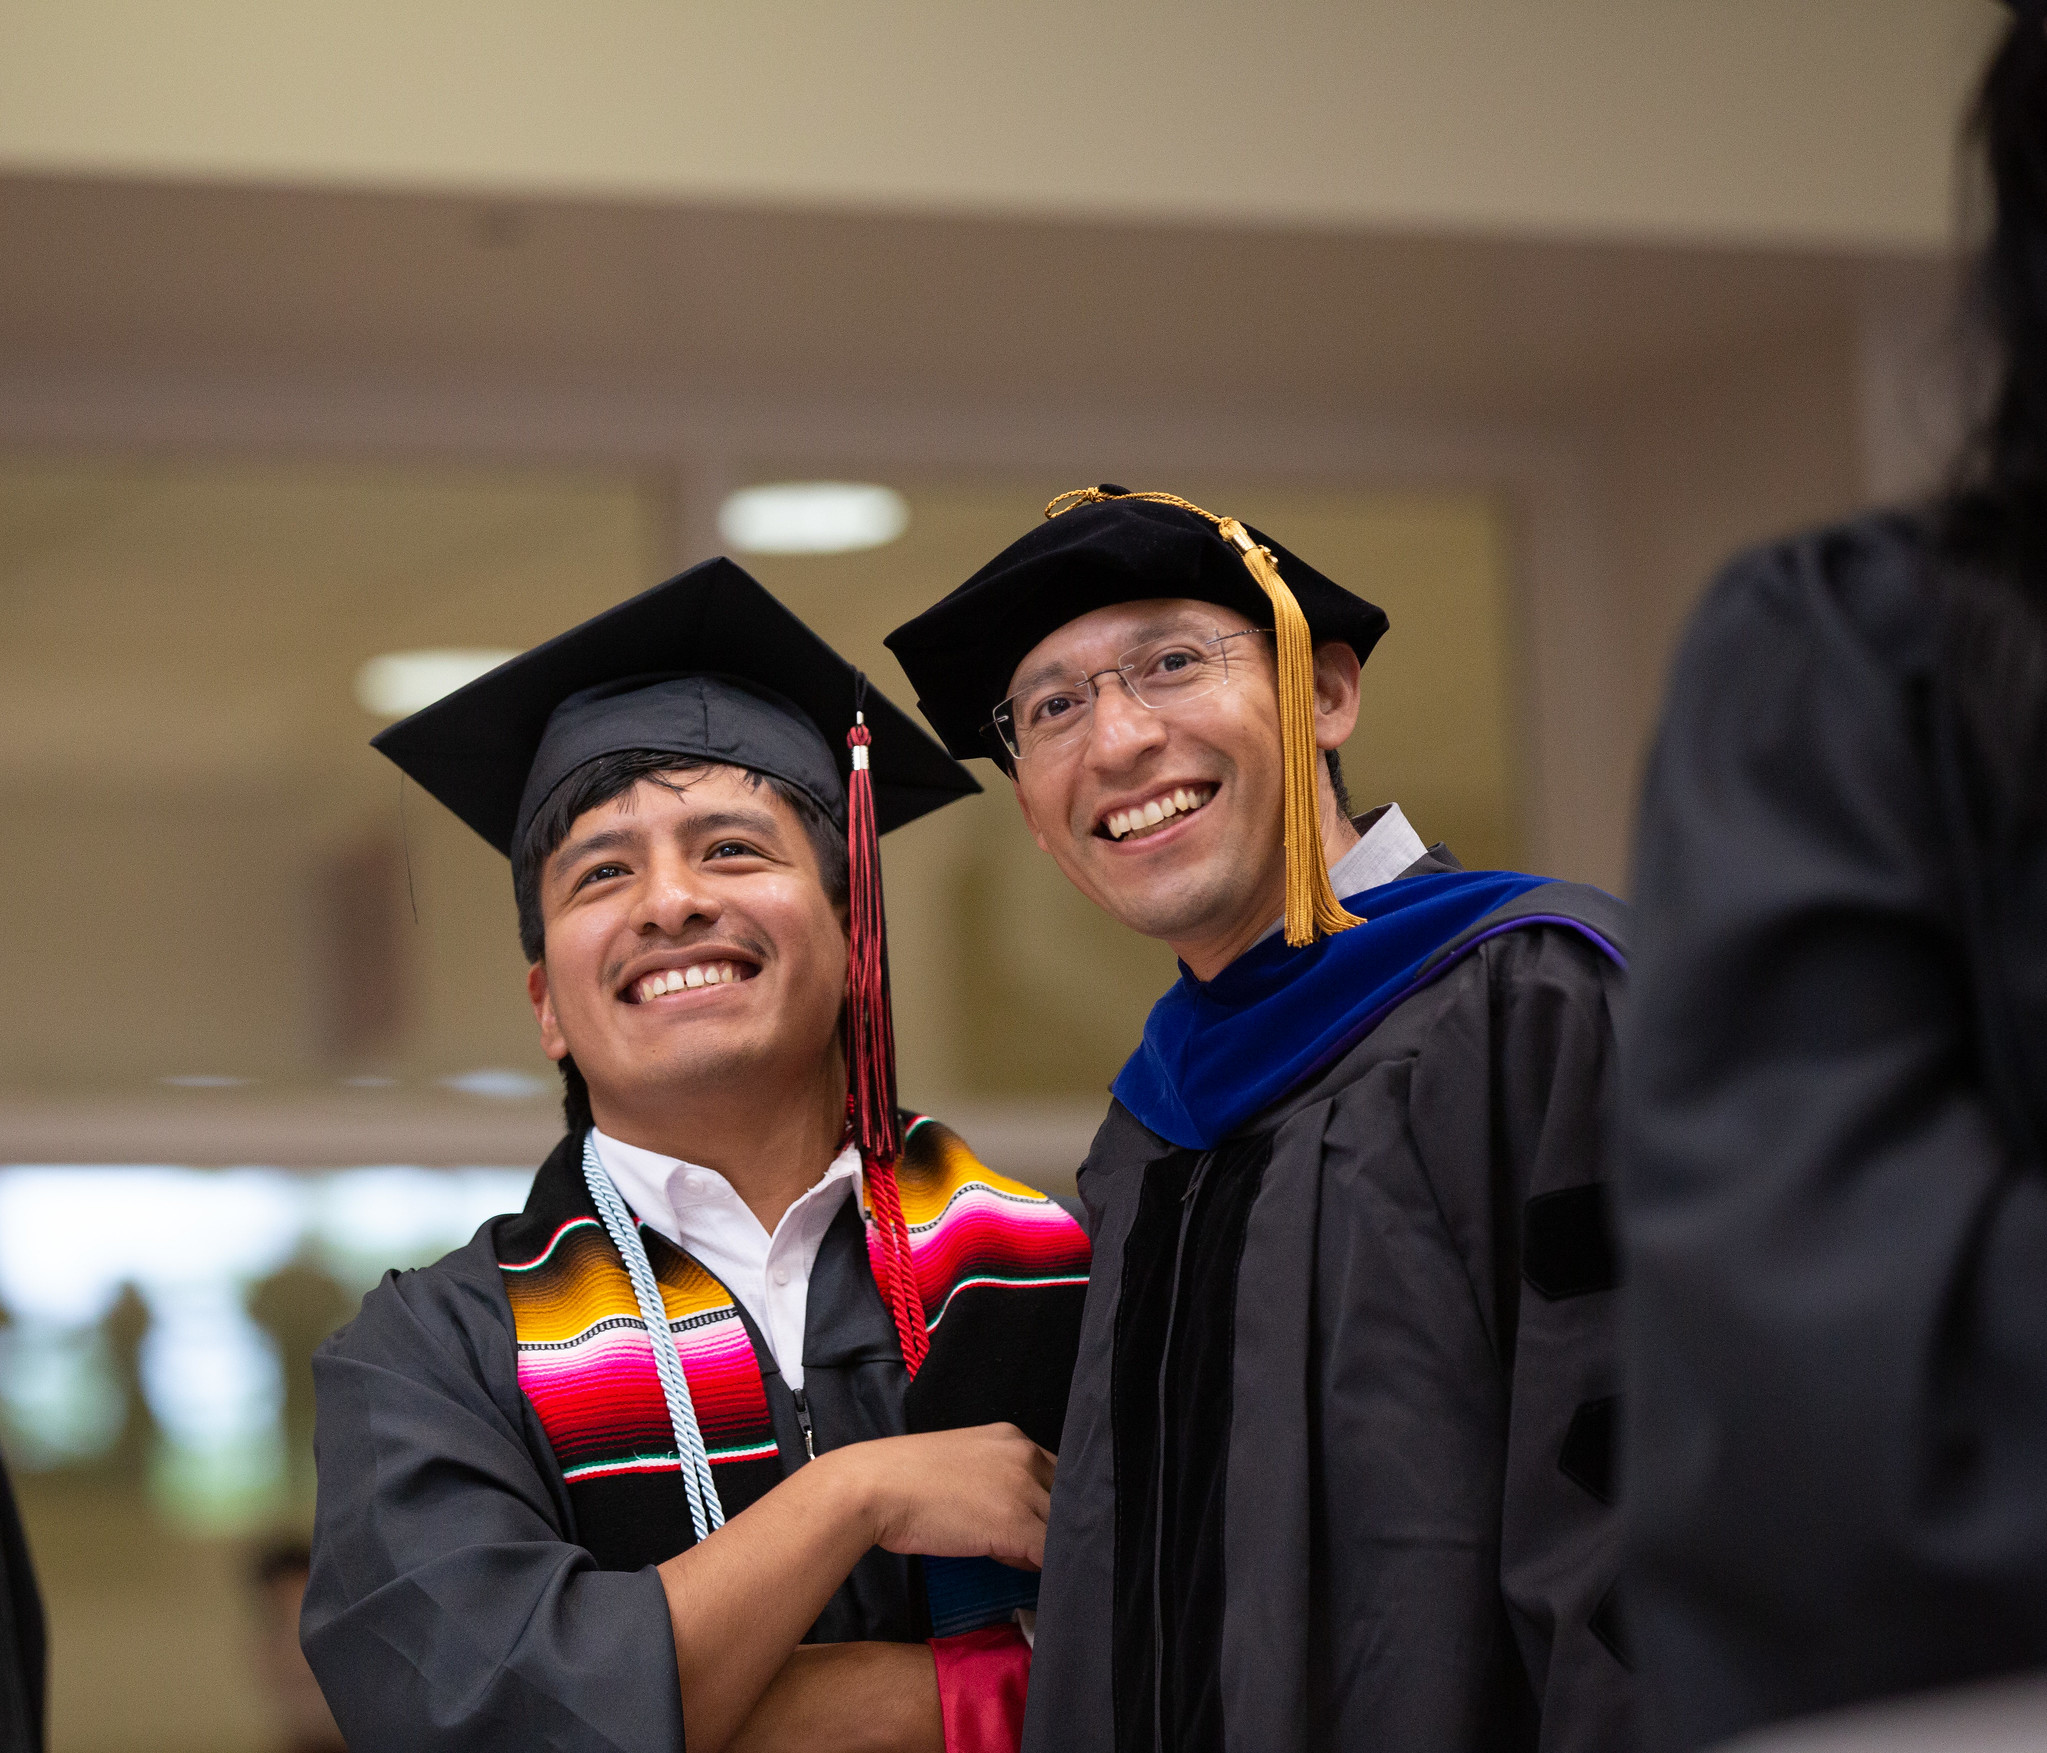 Student standing with his professor at hooding ceremony, smiling ad happy